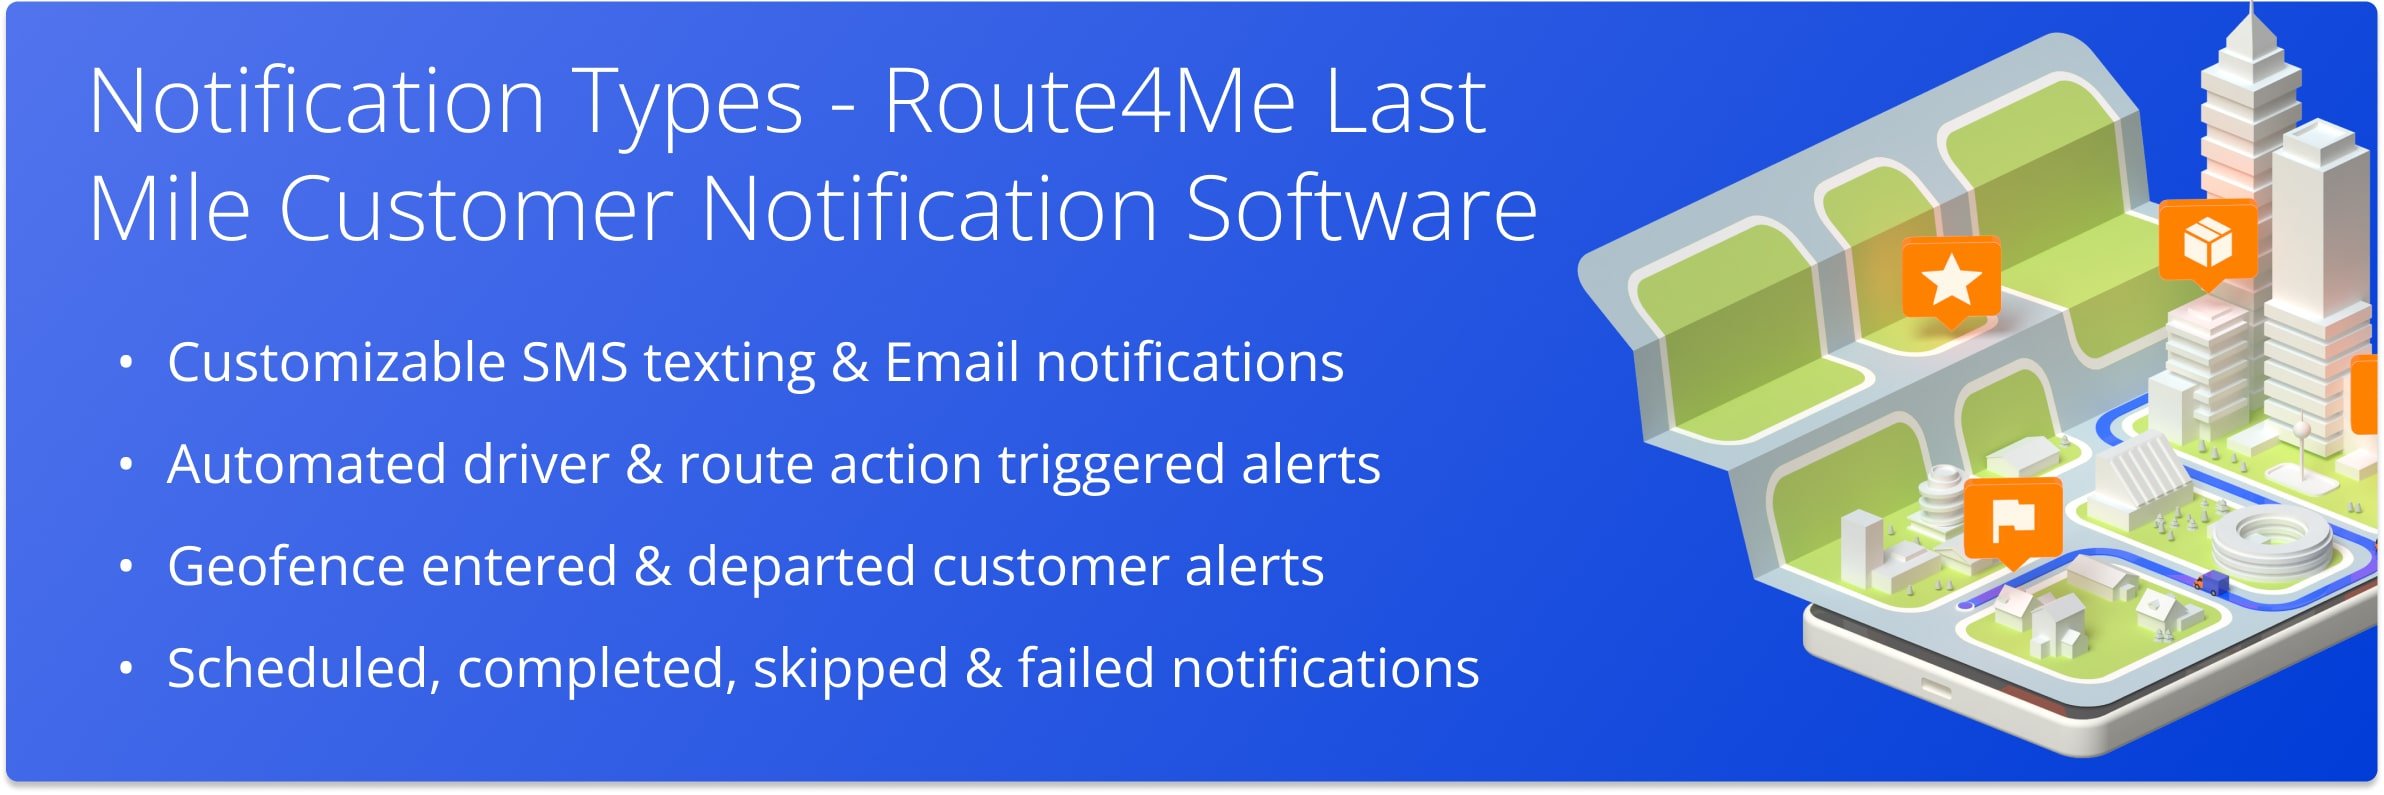 Route4Me enables you to send automated SMS and Email customer notifications for a variety of trigger events such as geofence entered, visit scheduled, order completed, and more.